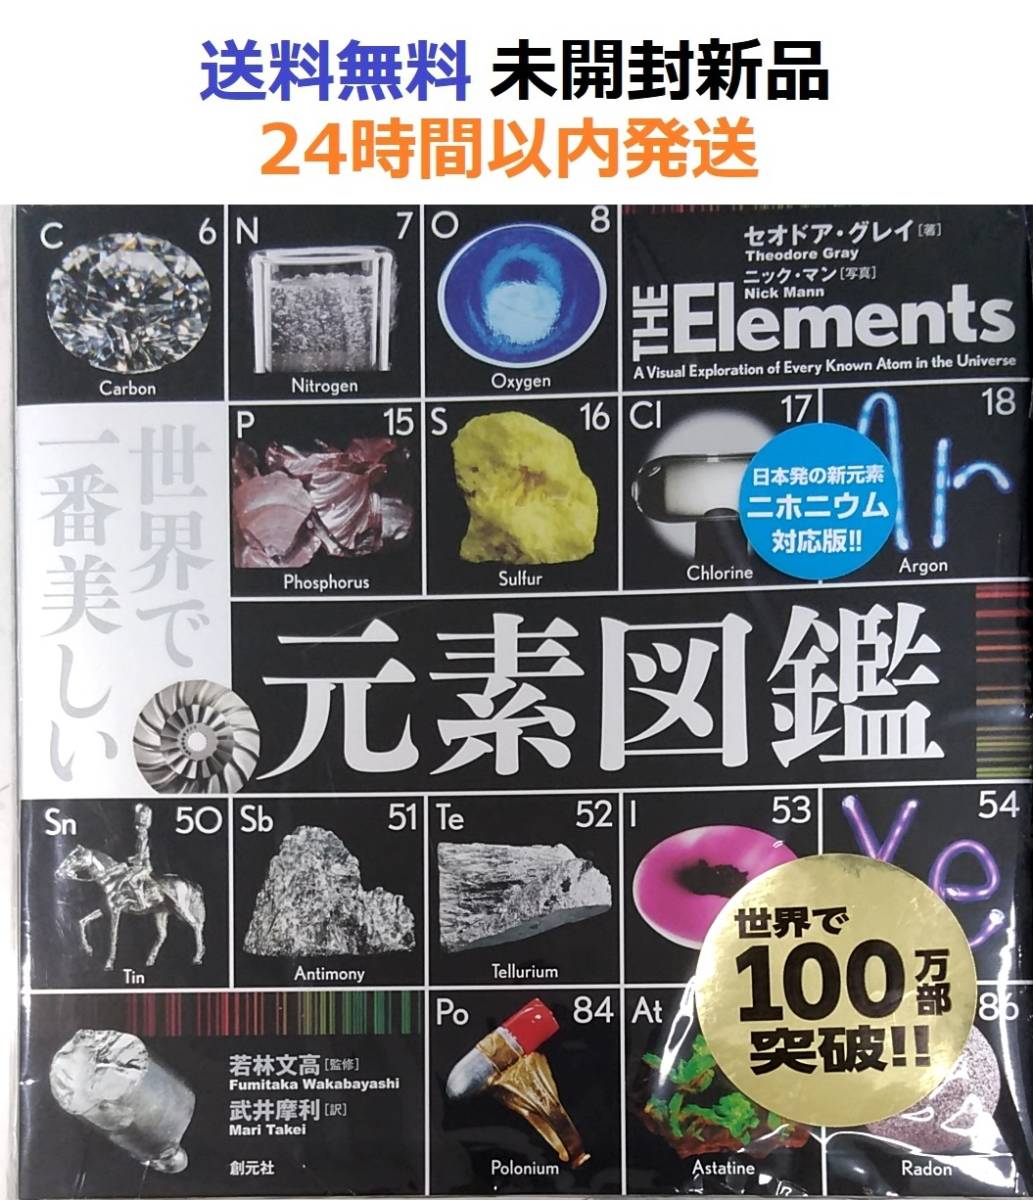  world . most beautiful origin element illustrated reference book seo door * gray, Wakabayashi writing height other 